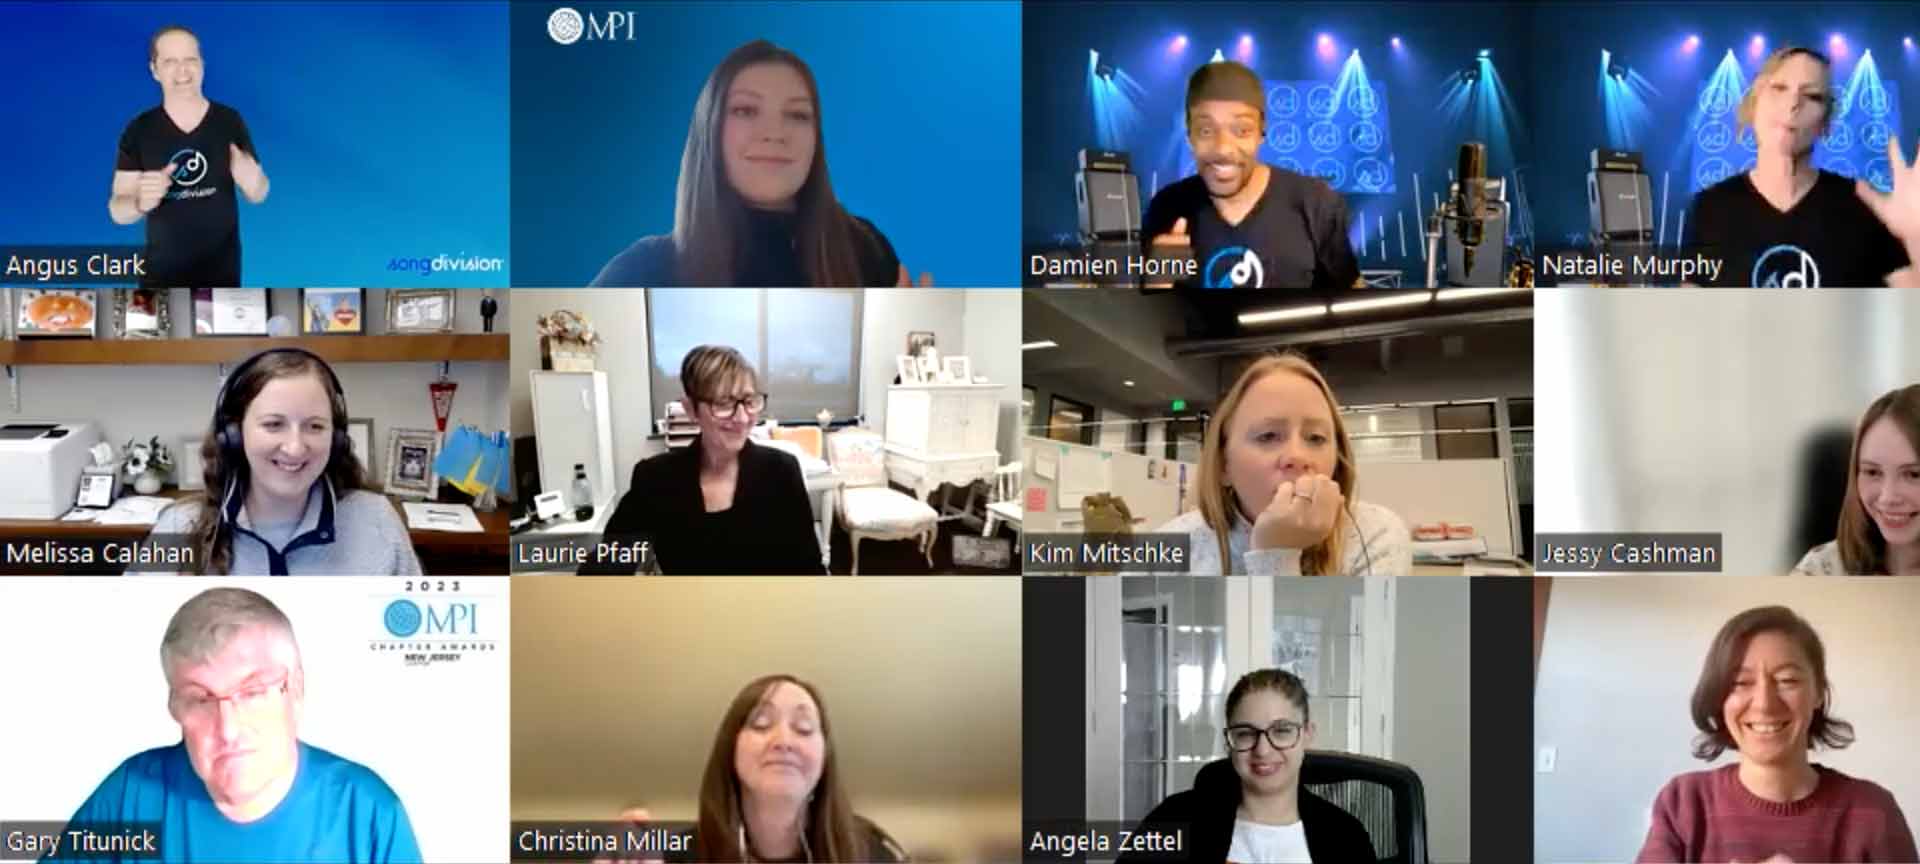 Meeting Professionals International (MPI): Team Harmony Webinar with SongDivision